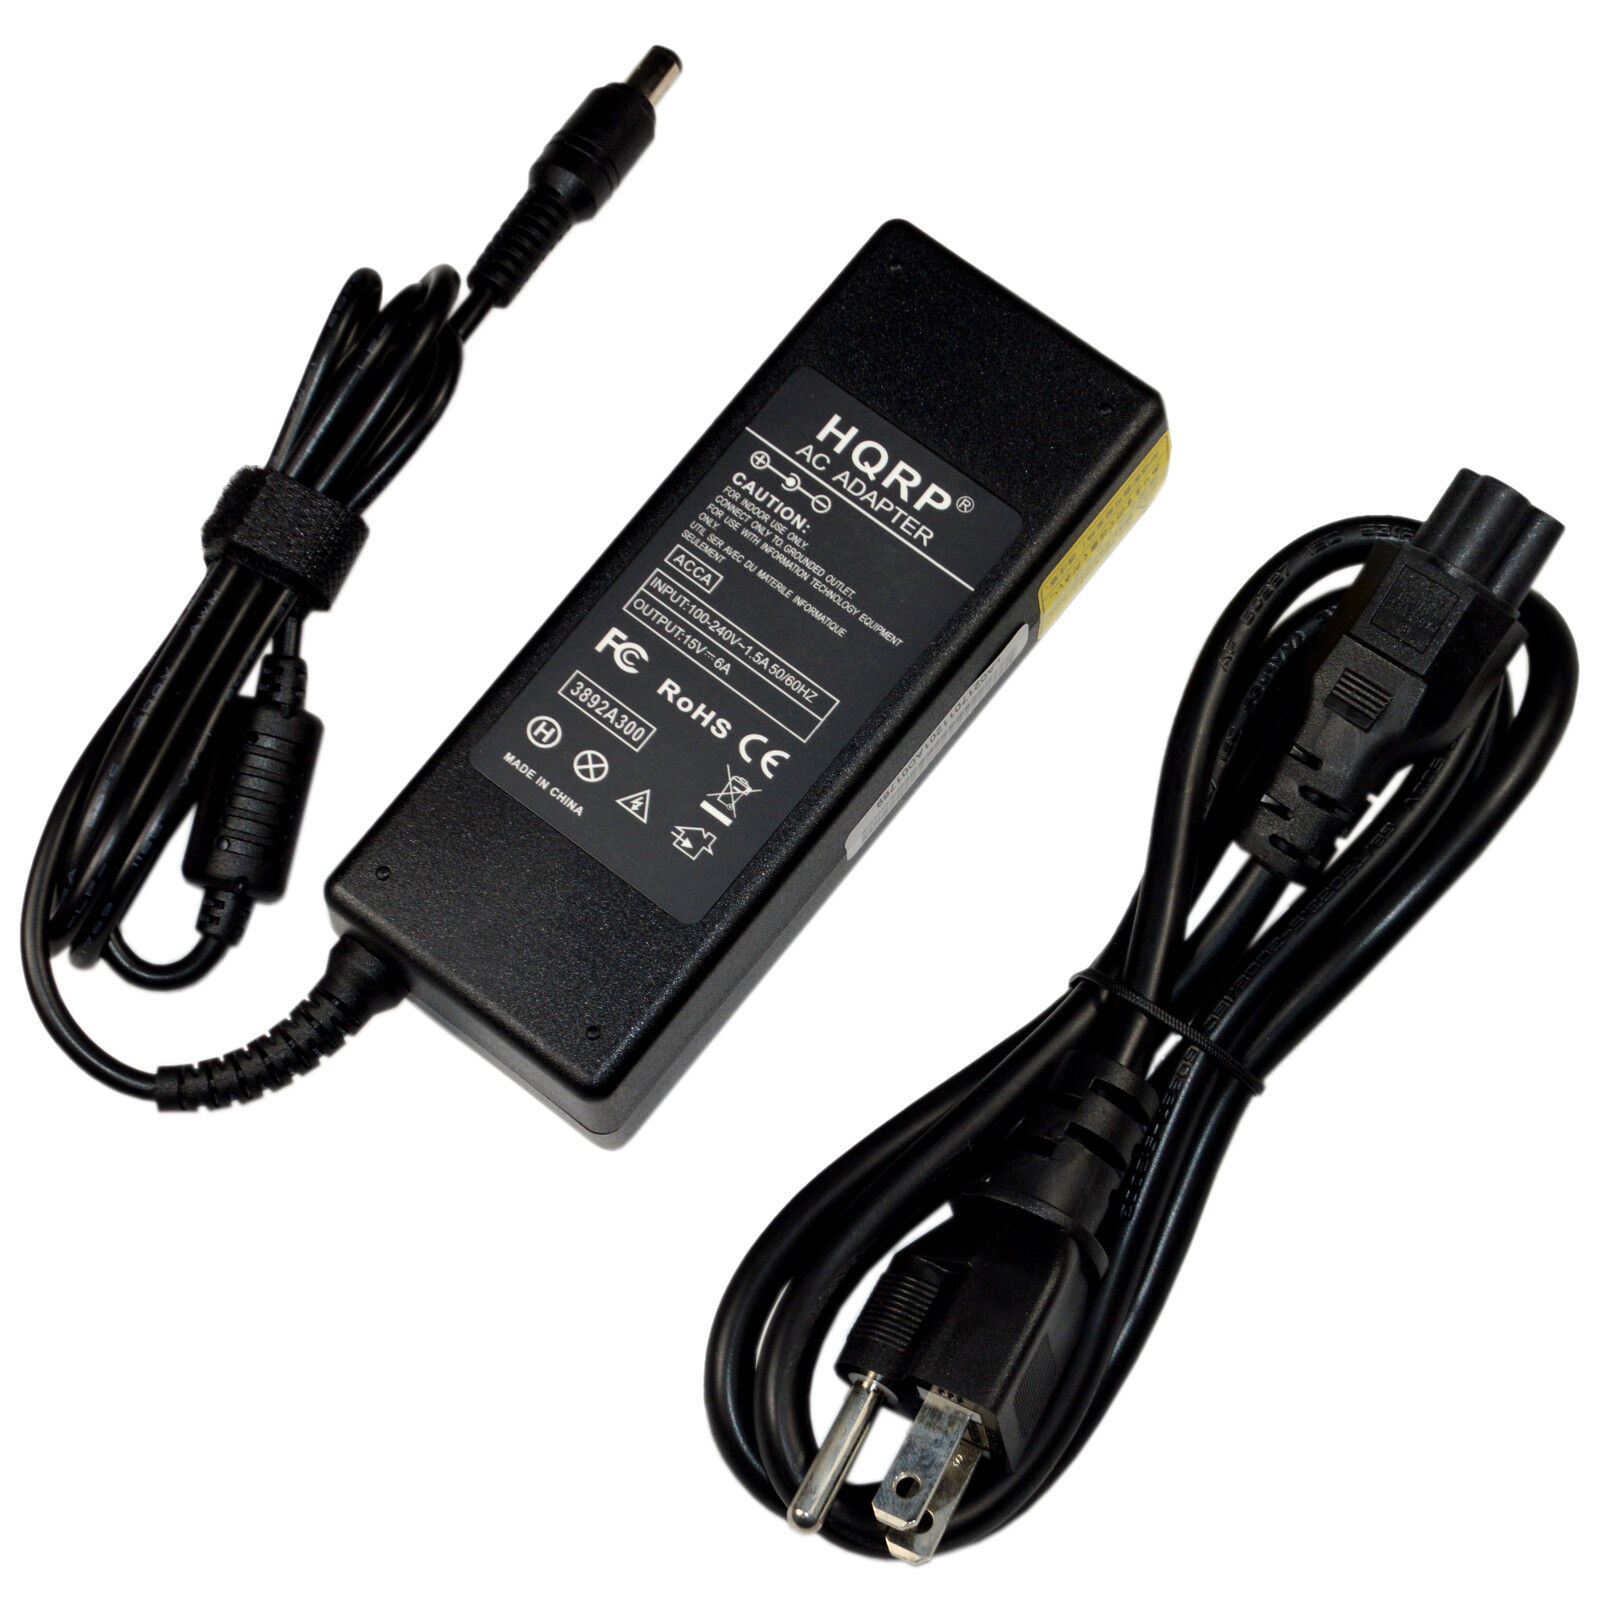 AC Adapter Charger for Toshiba Tecra 500 700 9000 A3-A11 Series Laptop, PA2501U